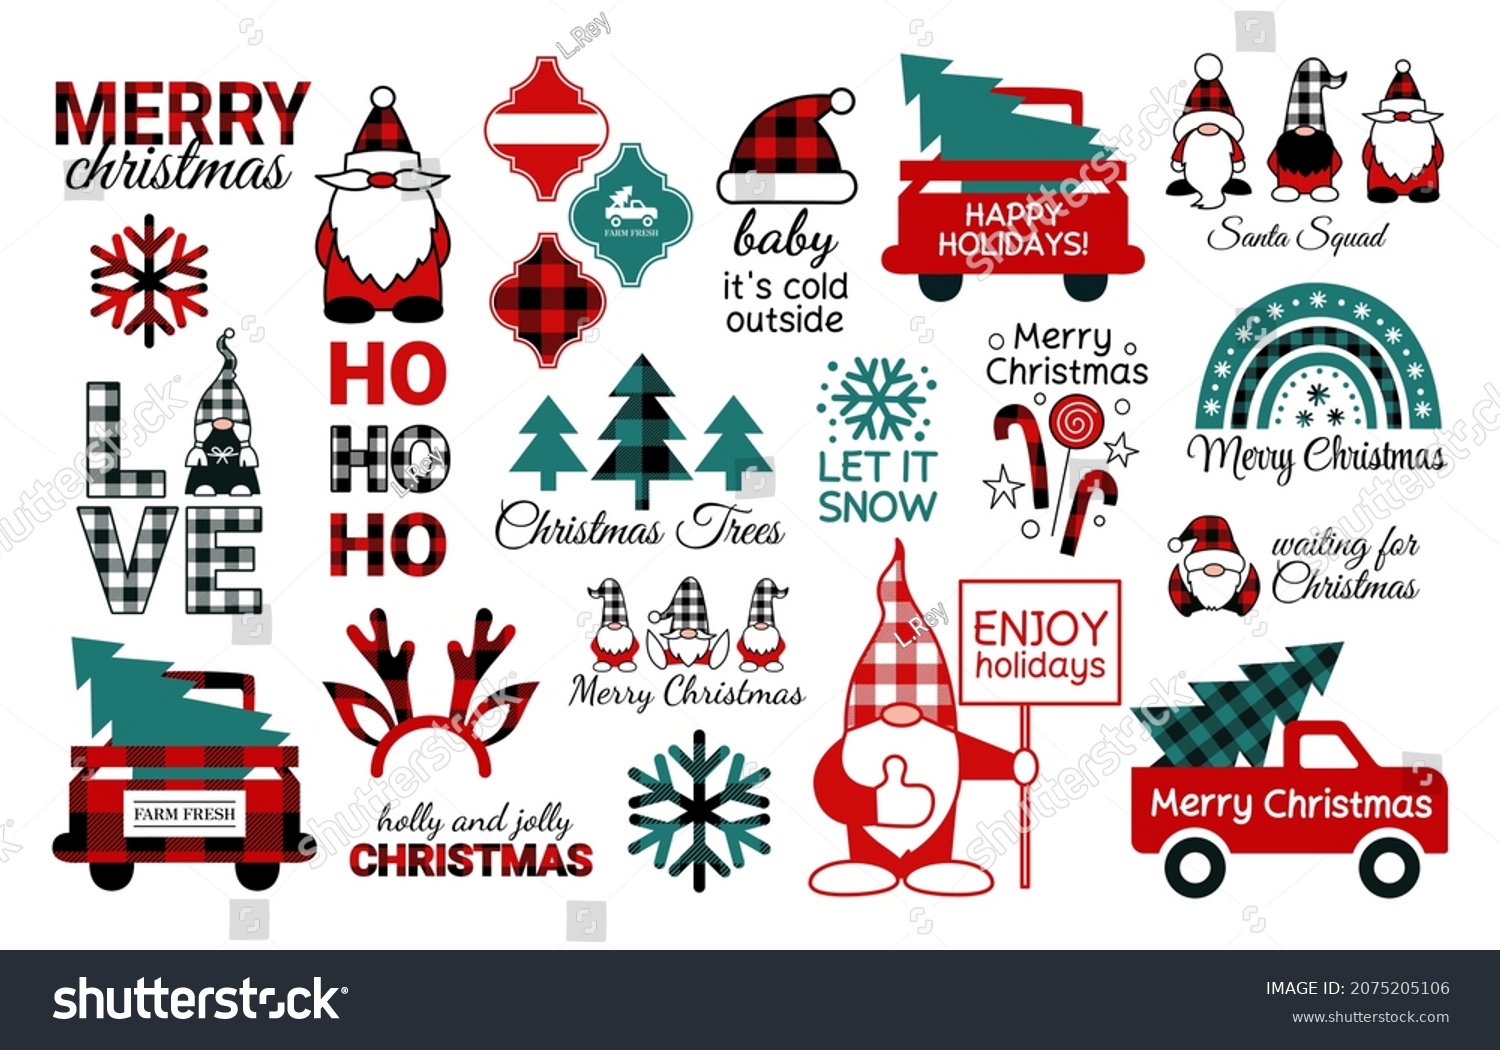 SVG of Christmas SVG bundle. Happy New Year. Buffalo plaid snowflakes. Christmas gnomes. Santa Claus squad. Arabesque tile ornament. Red truck with Christmas trees. Boho rainbow. Reindeer antlers. svg